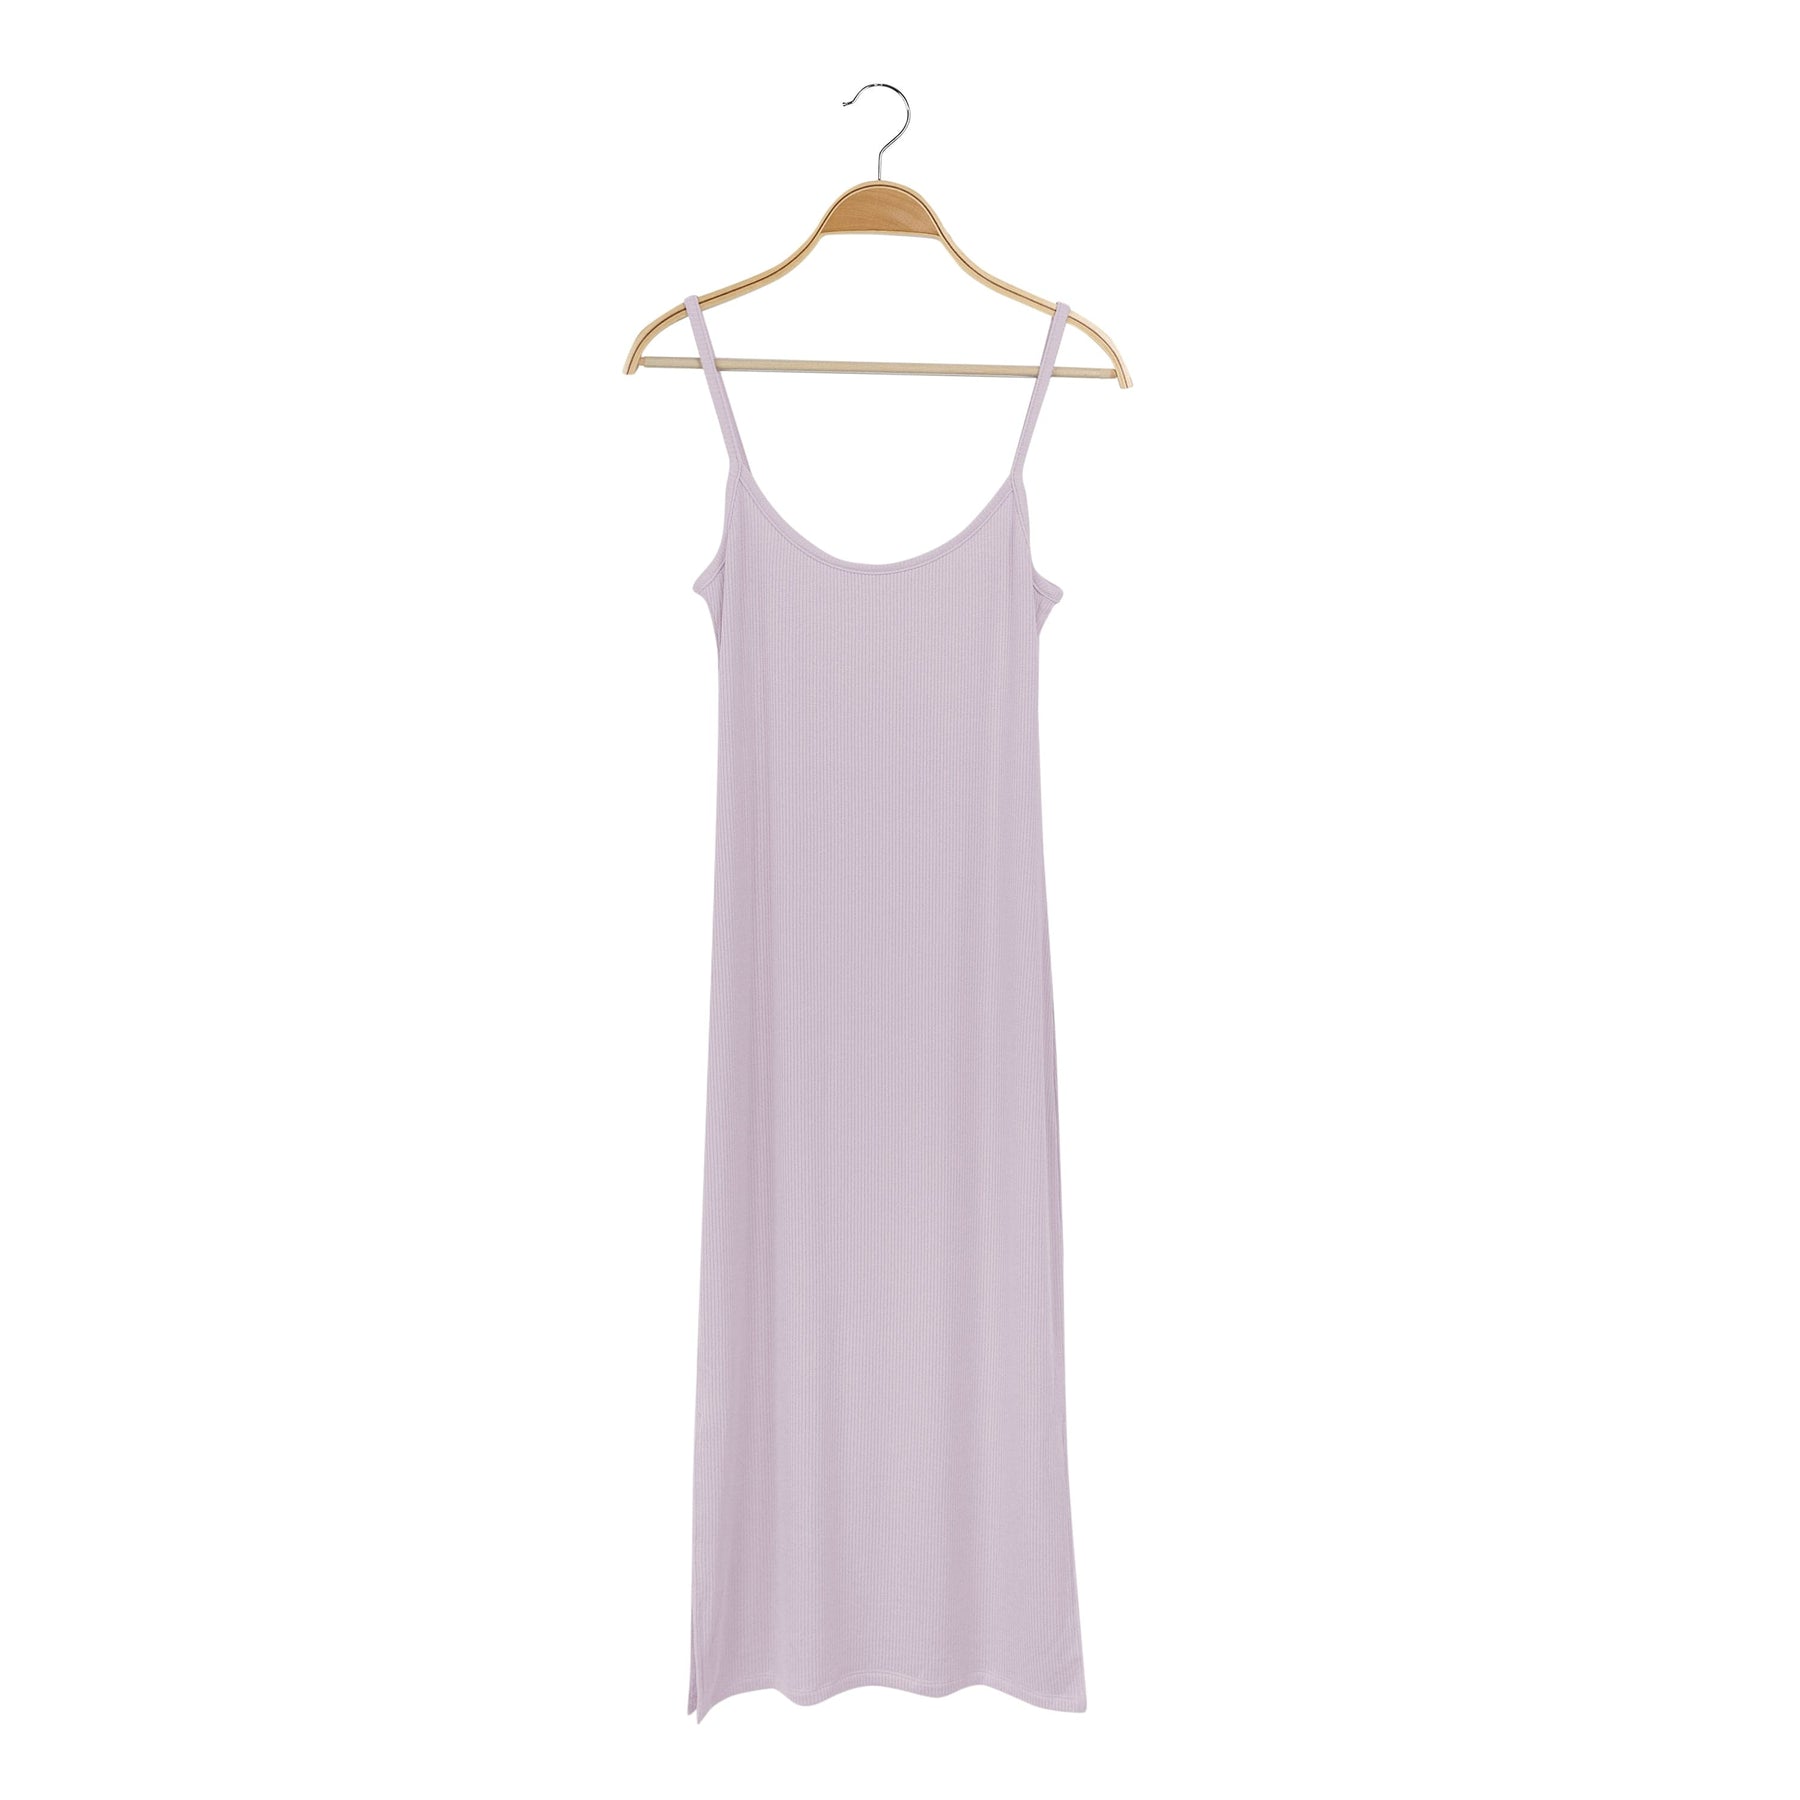 Kyte Baby Ribbed Women's Cami Dress Women's Ribbed Cami Dress in Wisteria